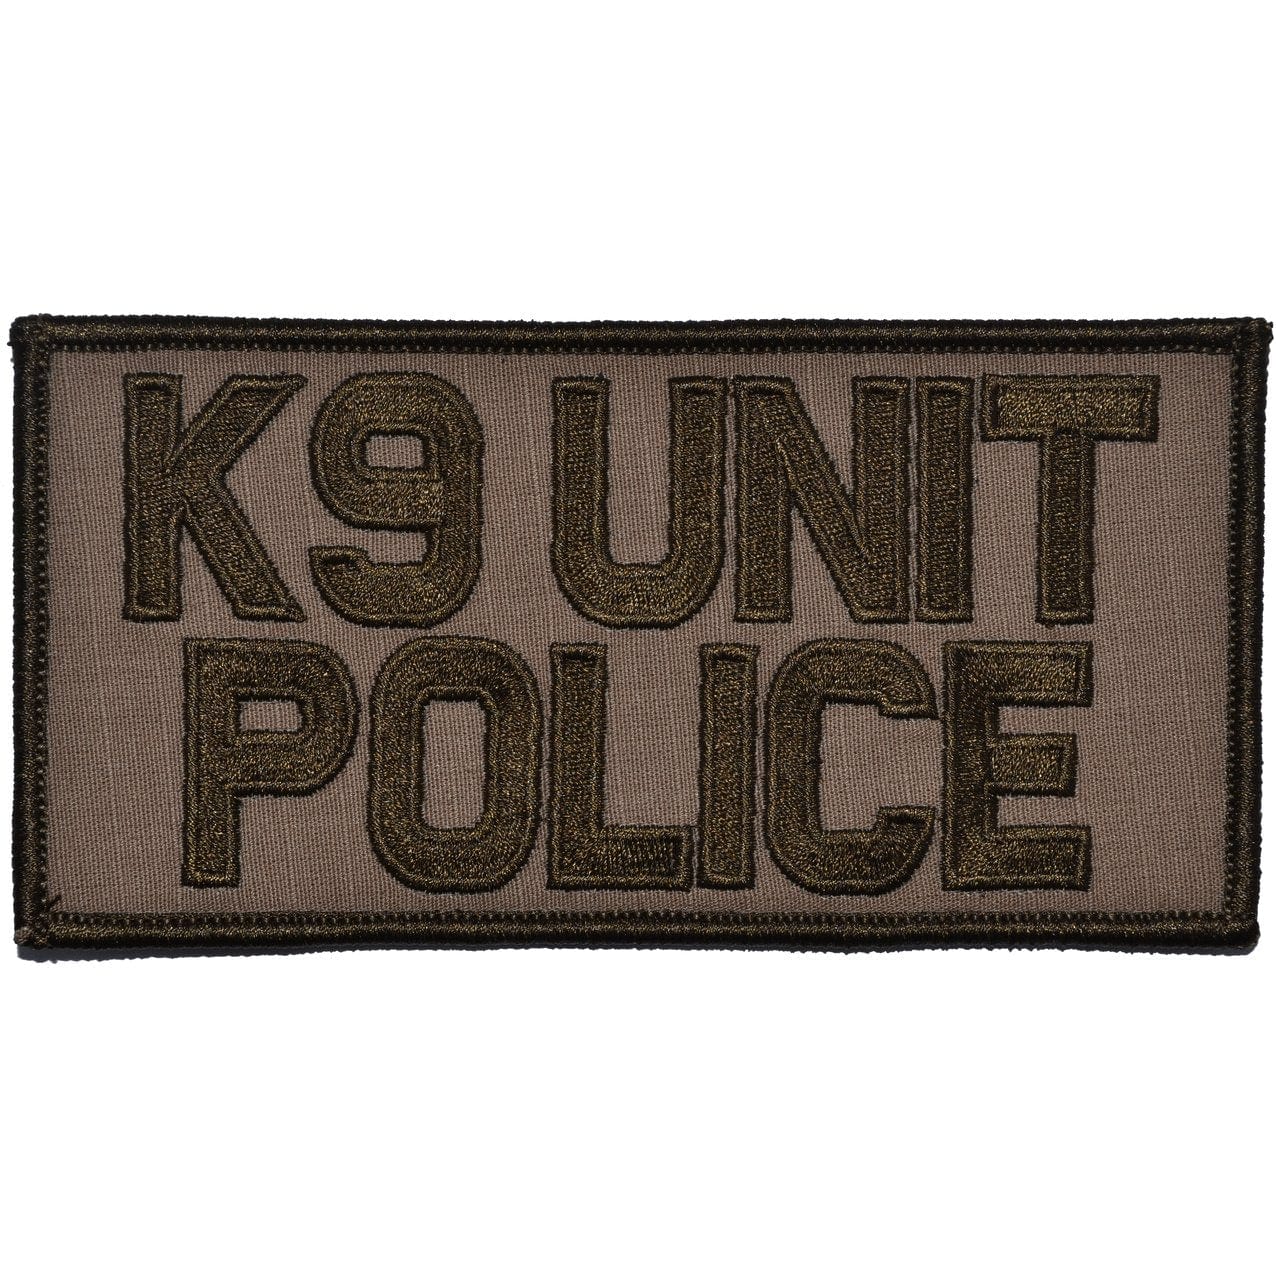 Tactical Gear Junkie Patches Coyote Brown K9 Unit Police - 3x6 Patch